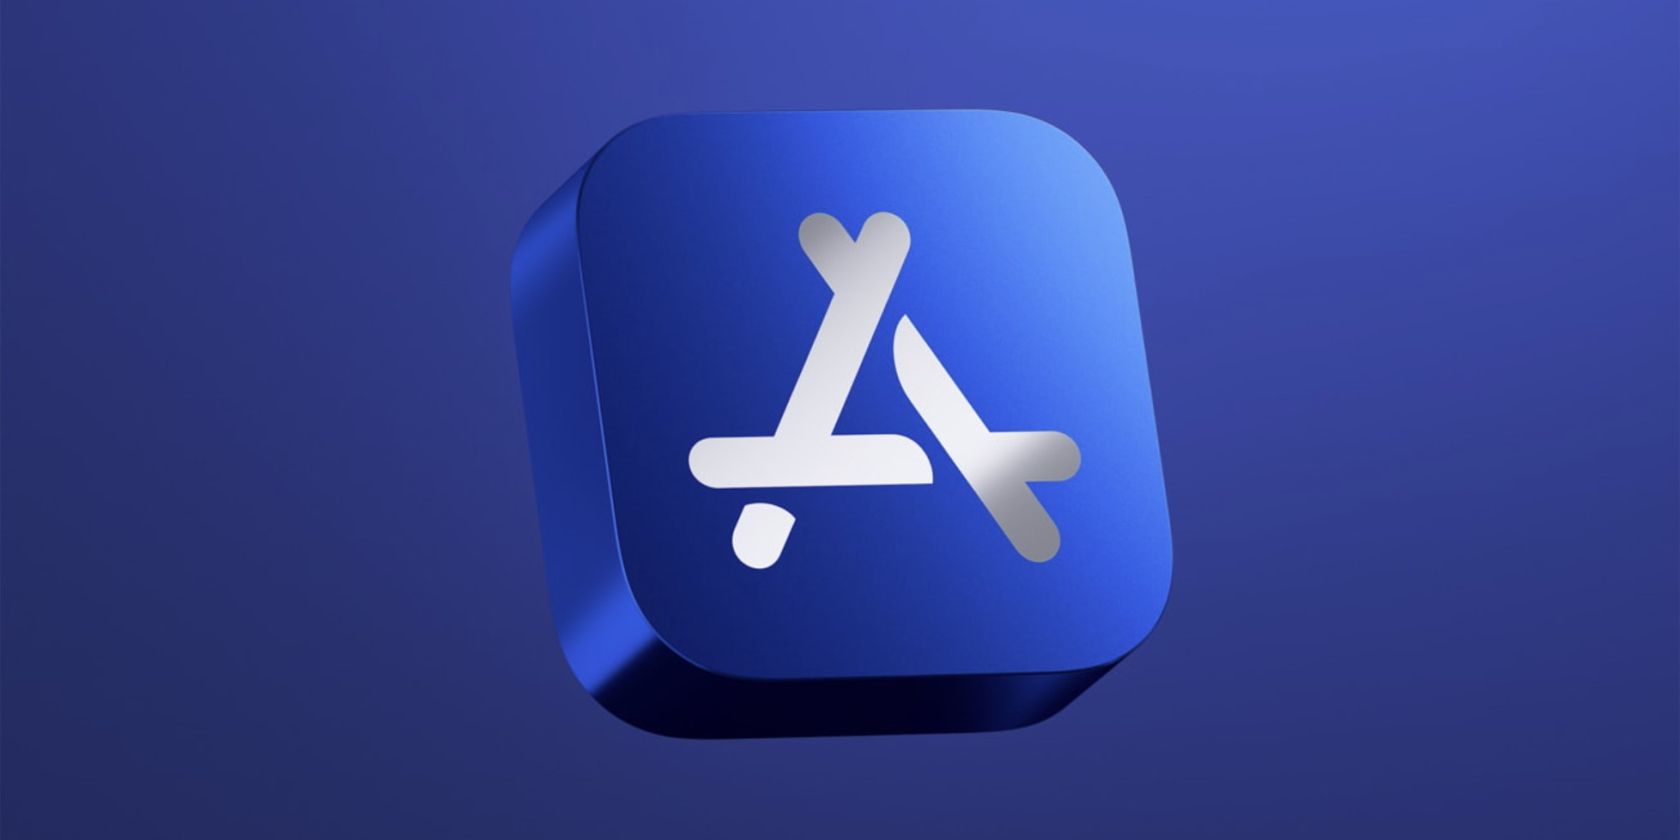 App Store icon on blue background